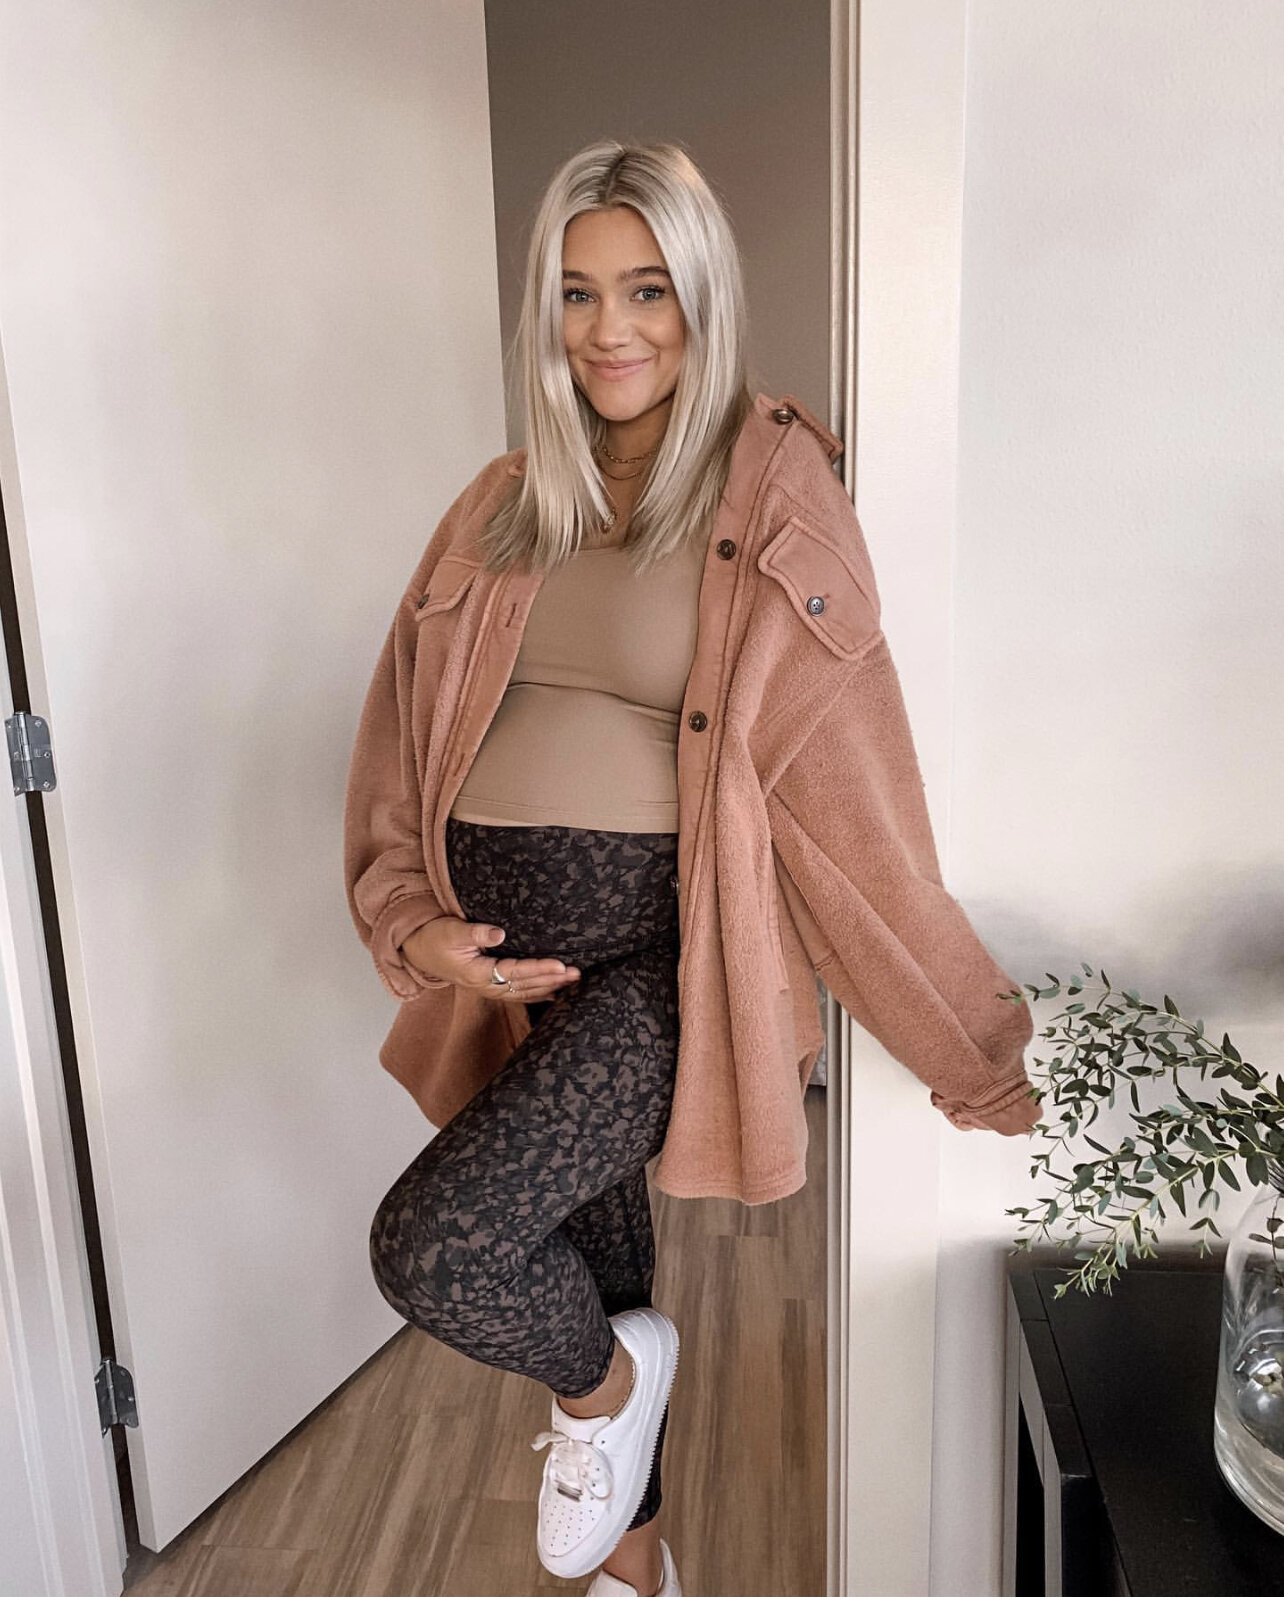 How To Style - The Free People Ruby Jacket - Pregnant Style.jpg